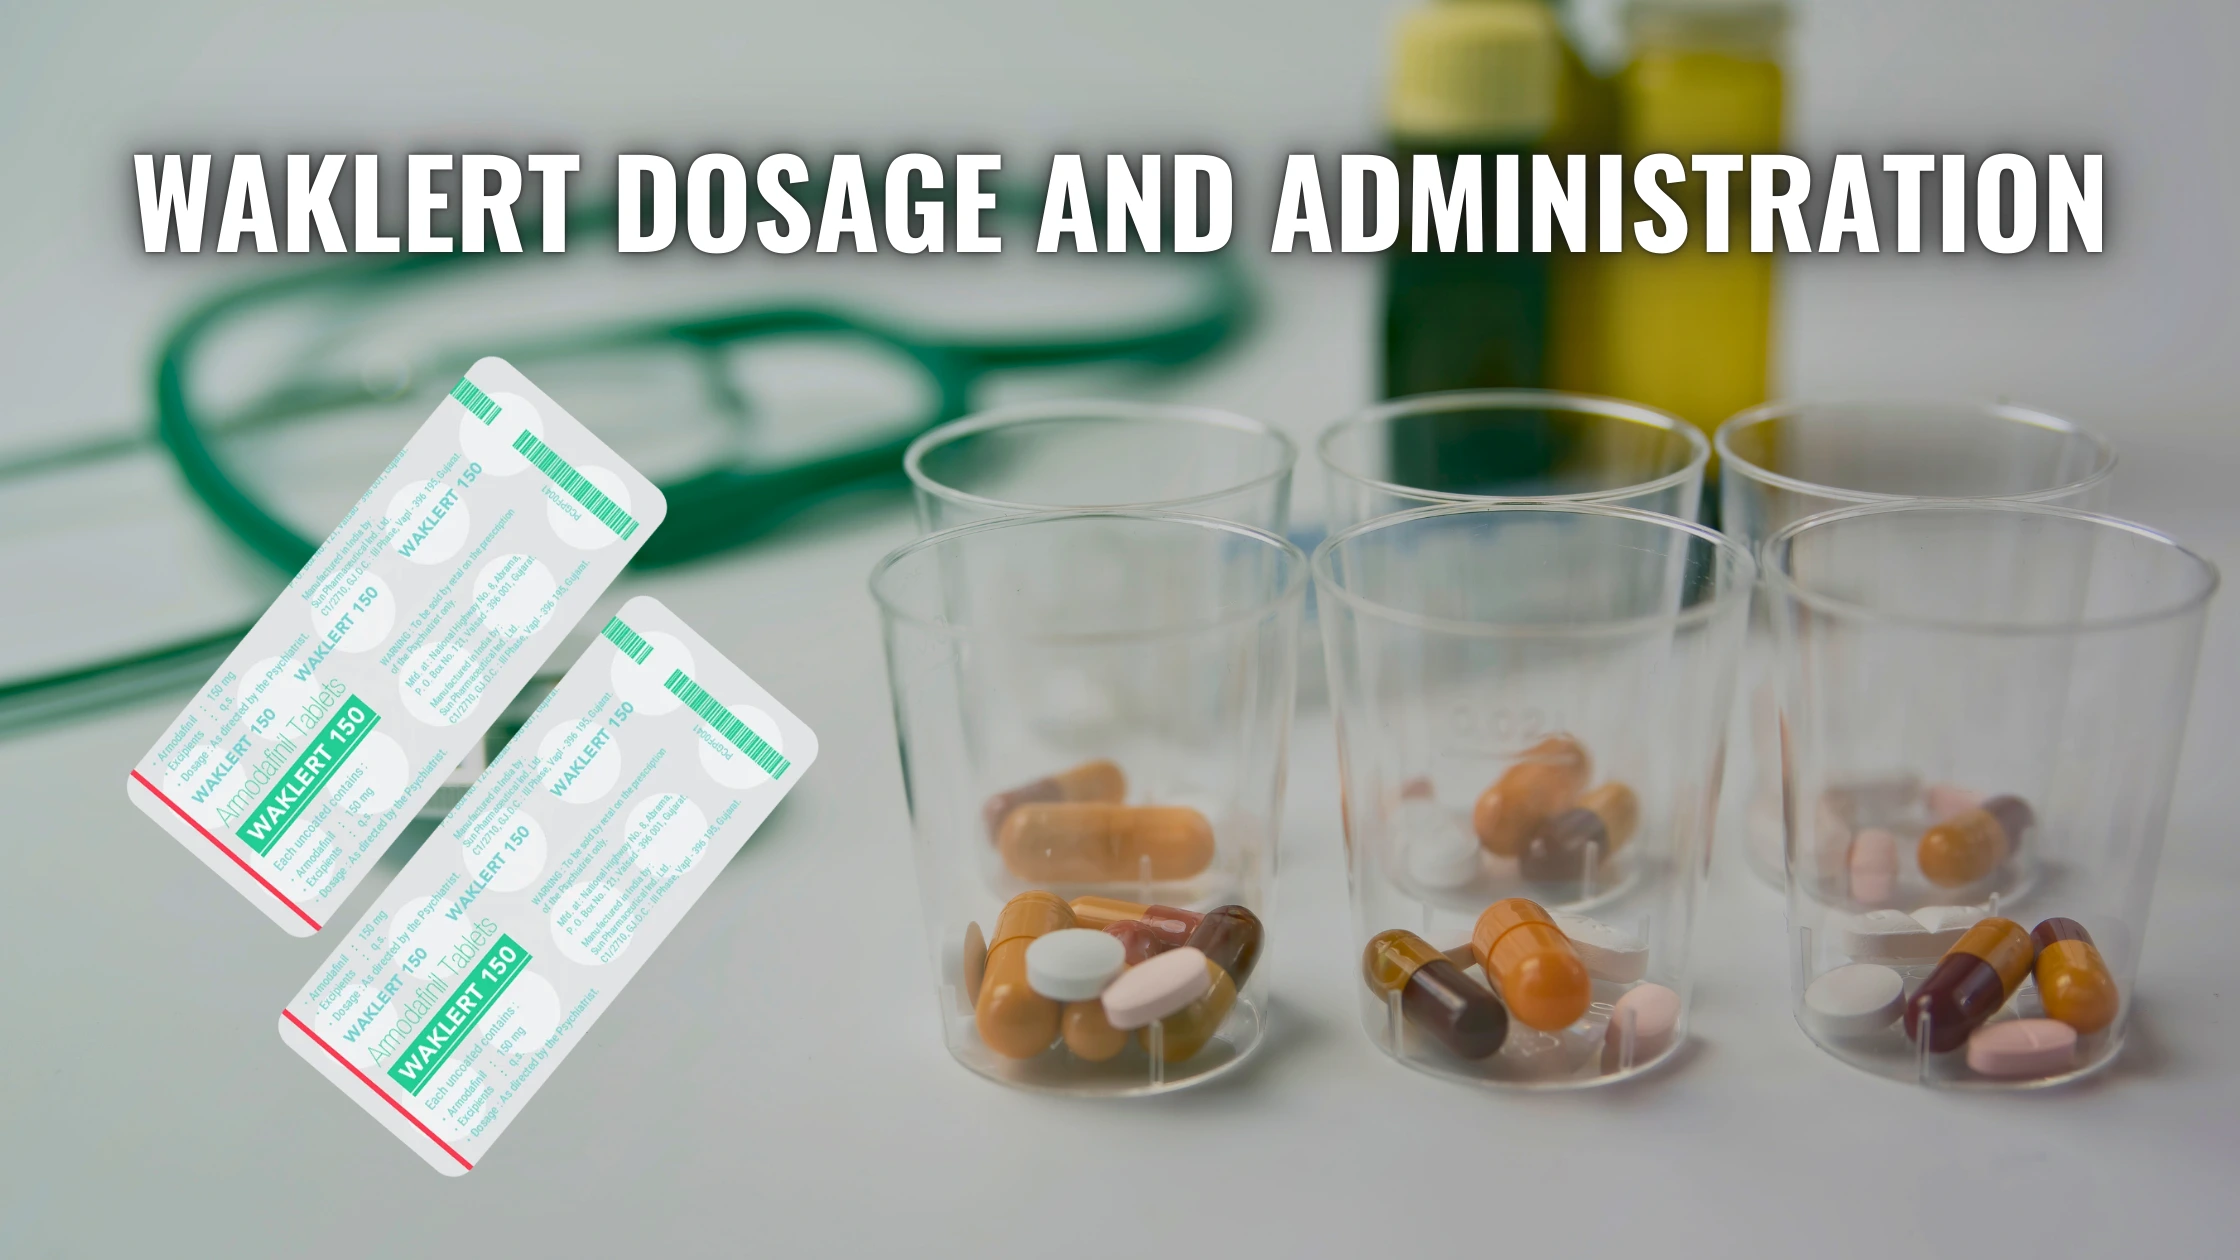 Waklert Dosage and Administration